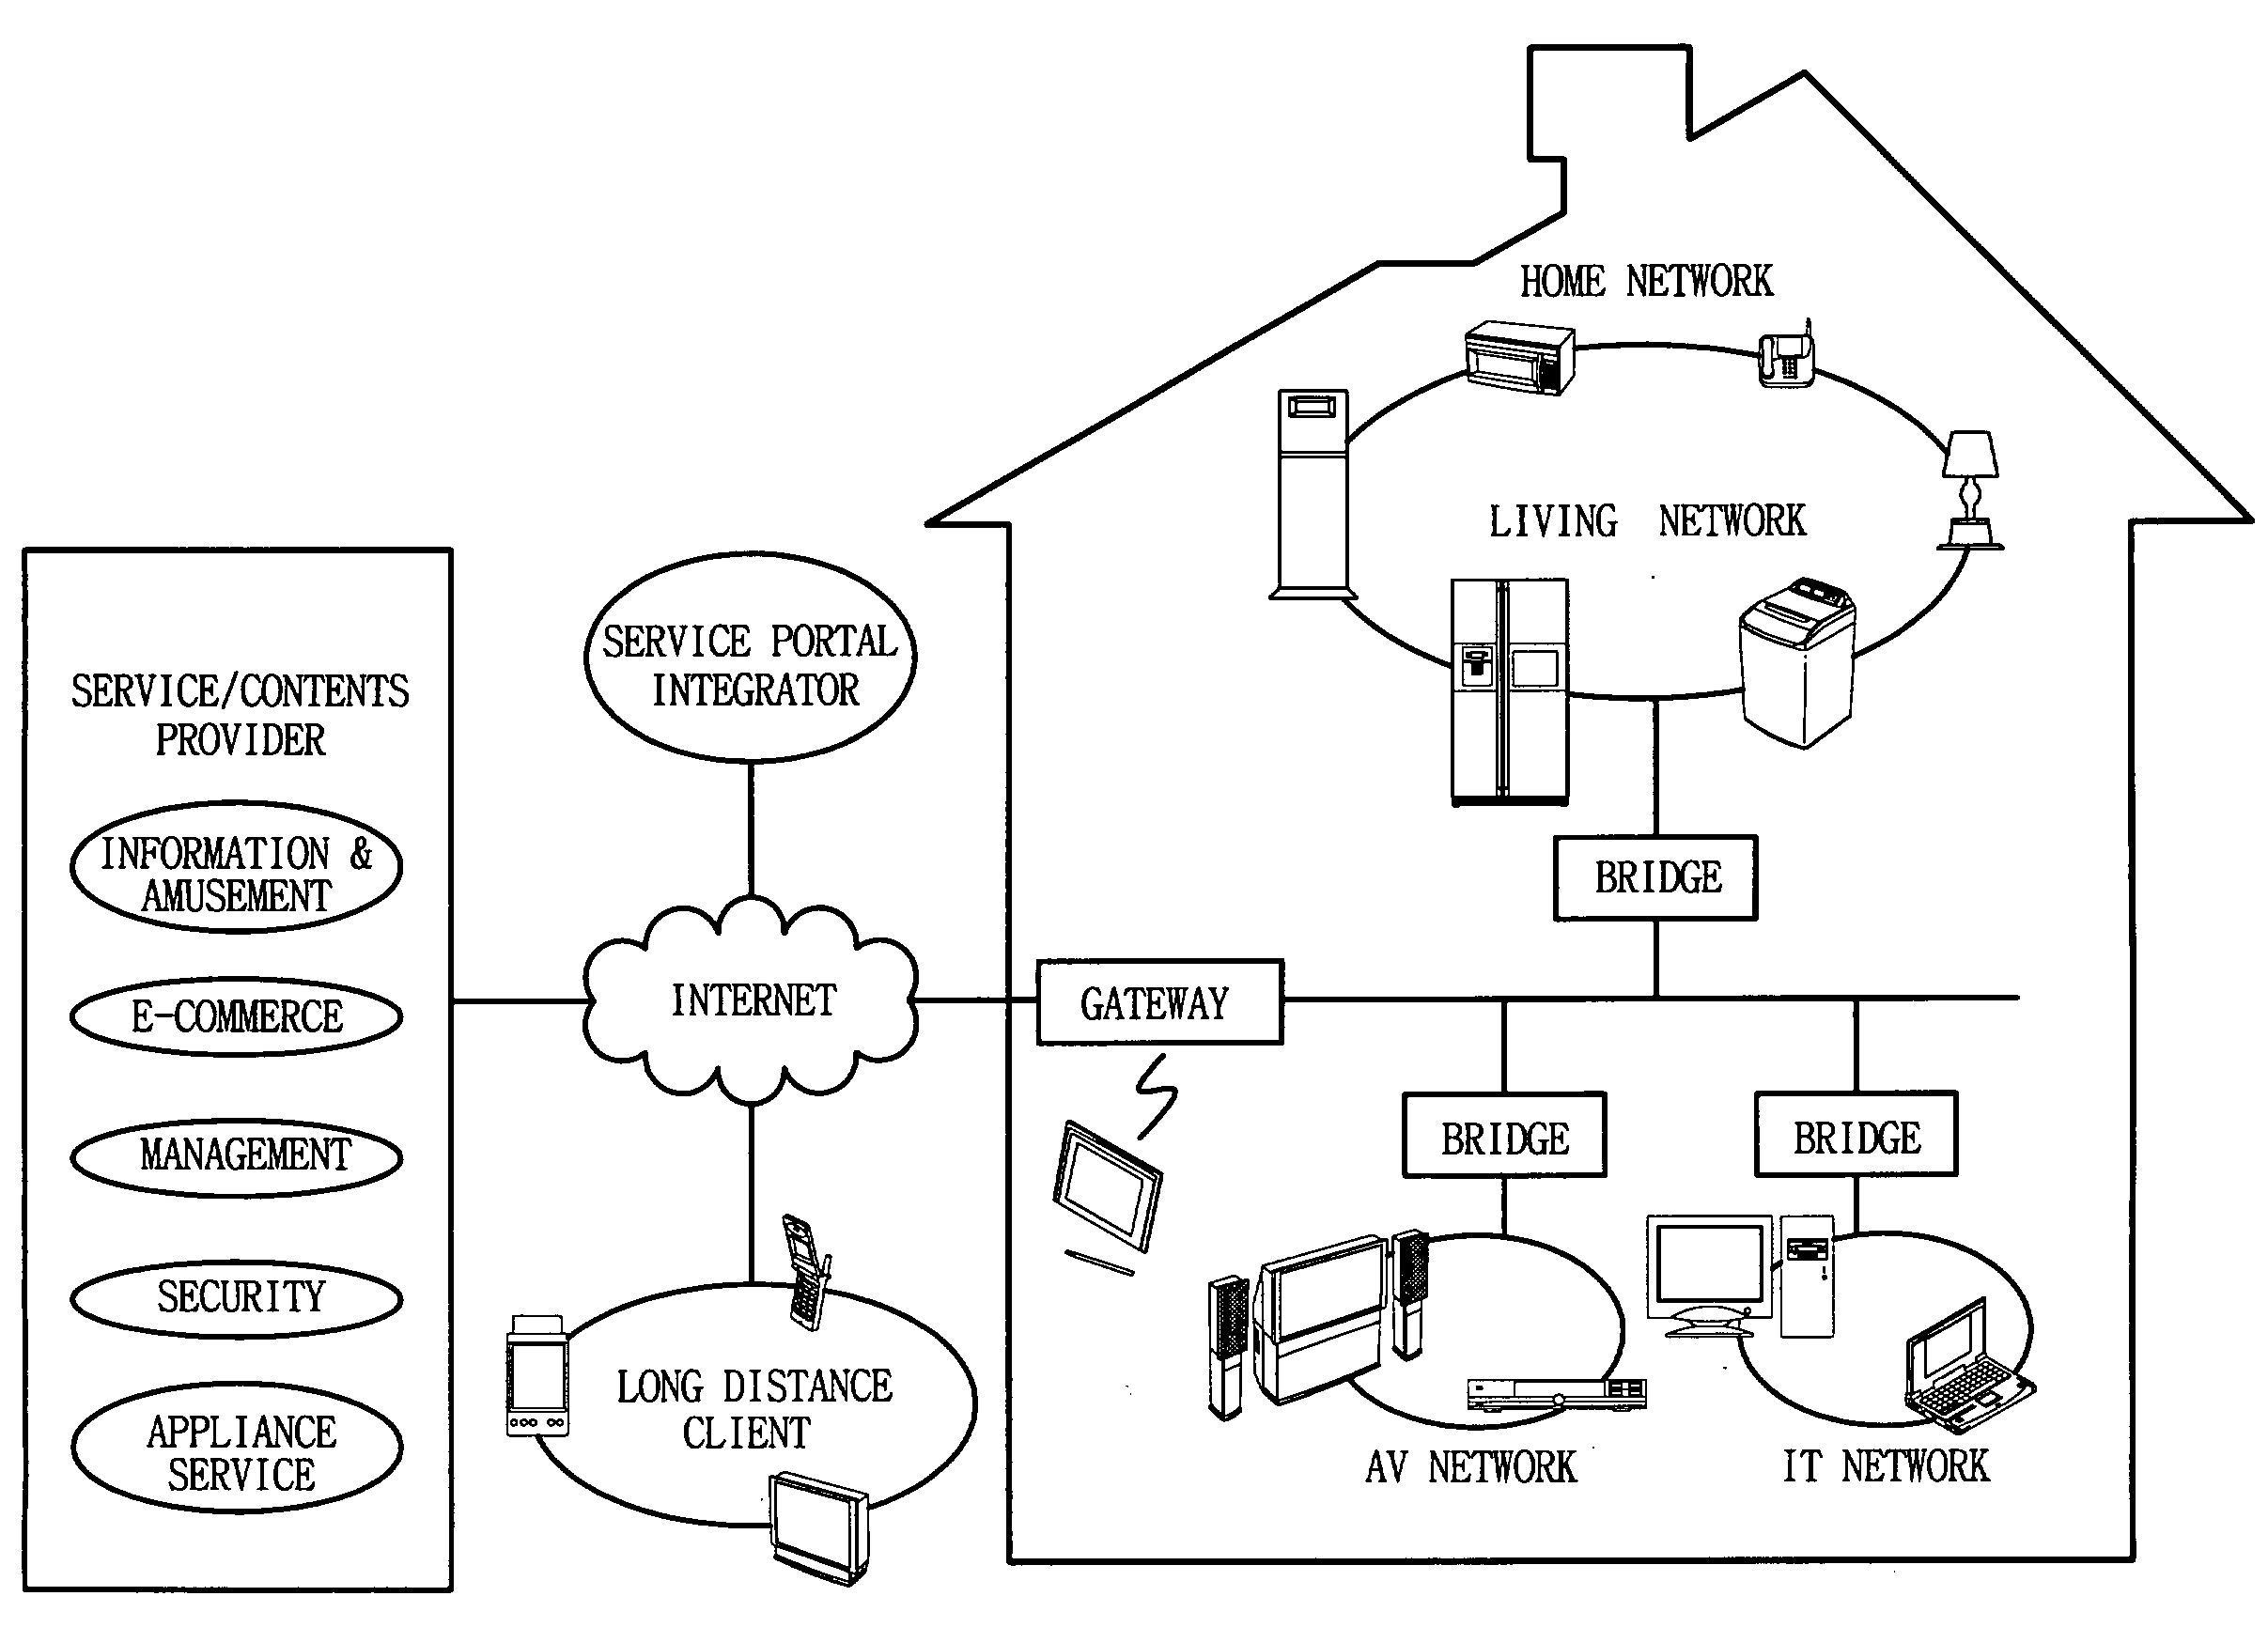 Home Network System